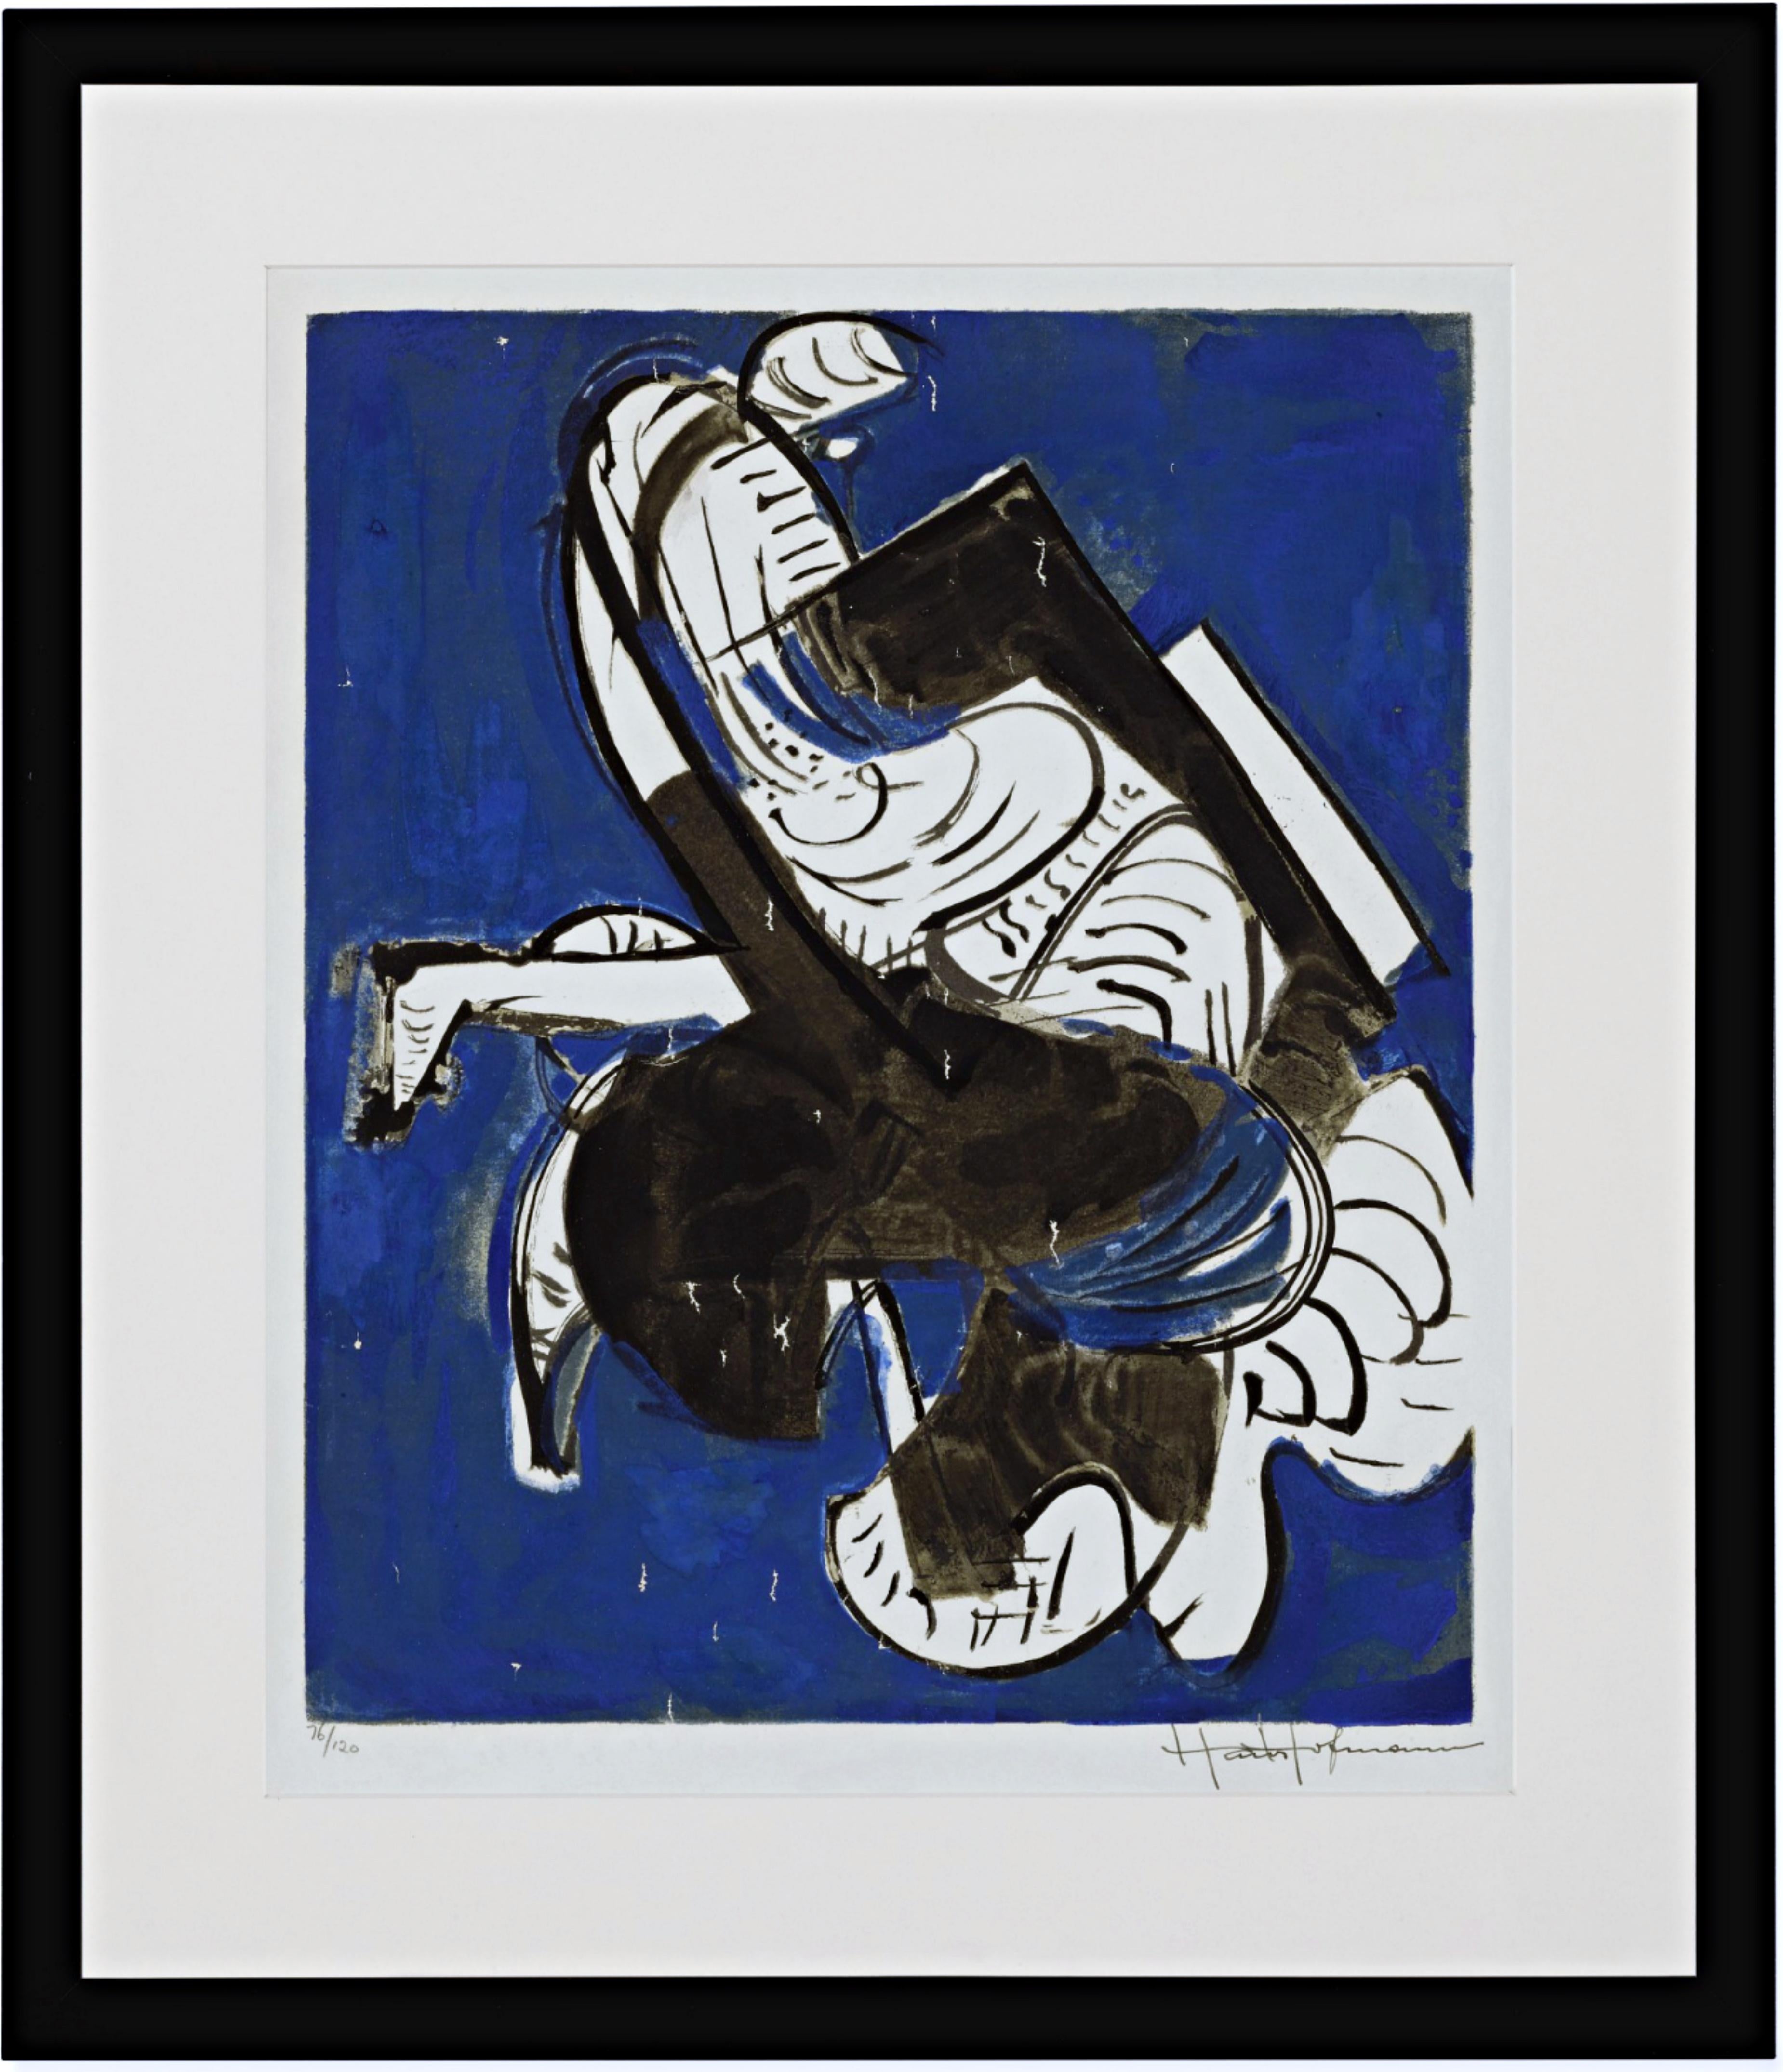 Composition in Blue (mid century modern Abstract Expressionist work on paper) - Print by Hans Hofmann